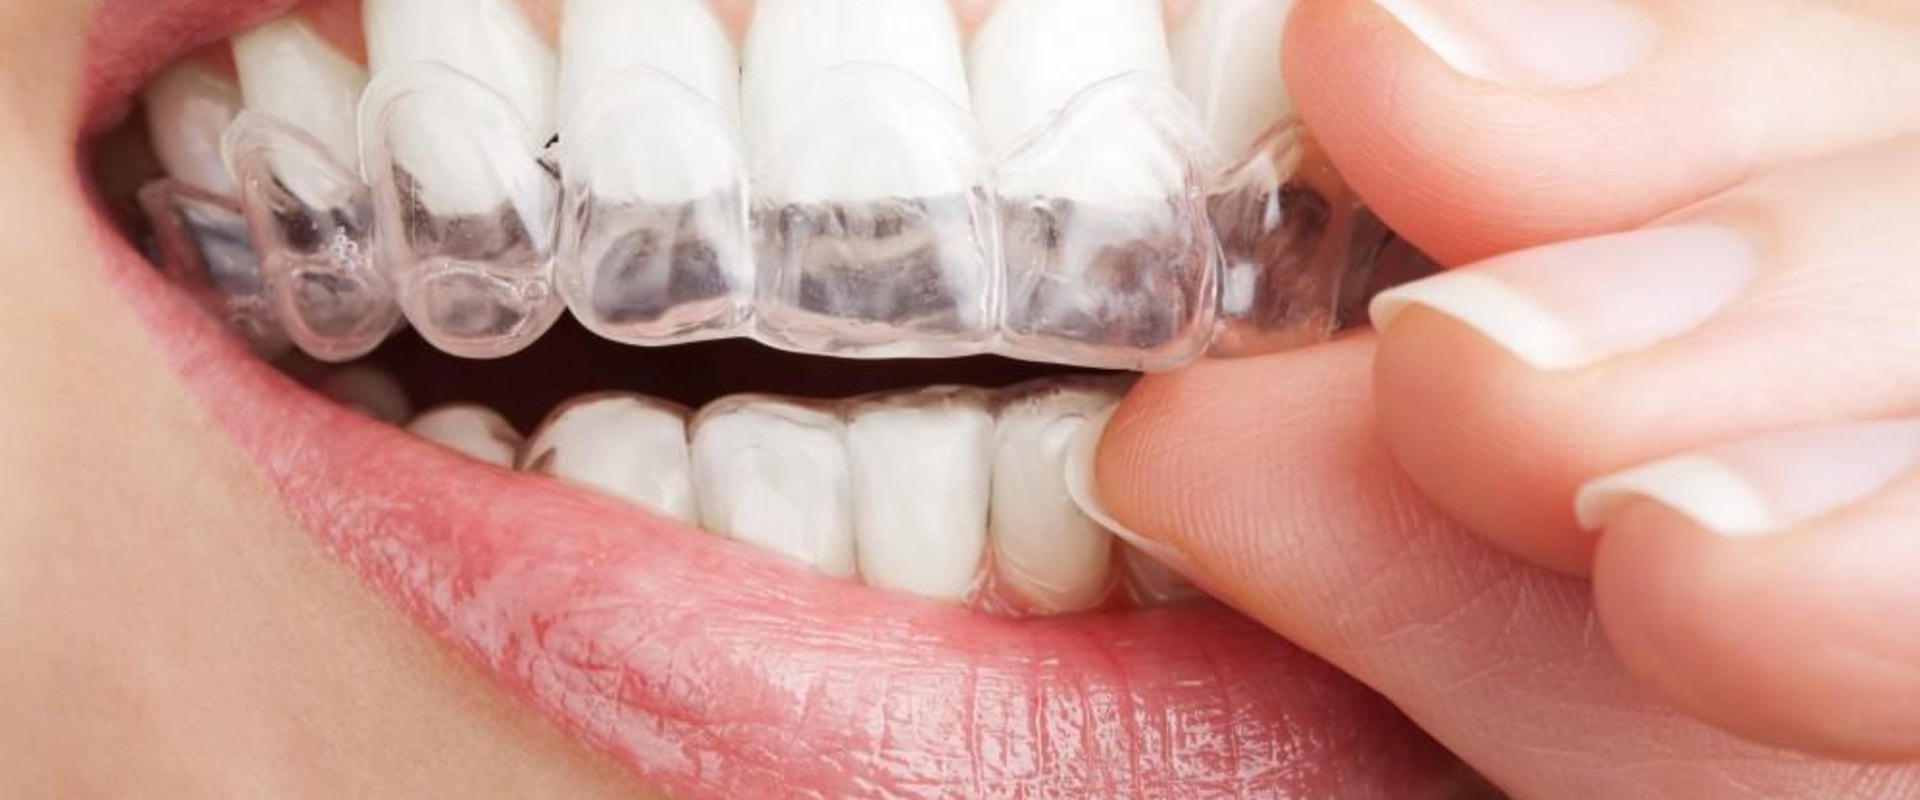 What Activities Should I Avoid While Wearing Invisalign Aligners?